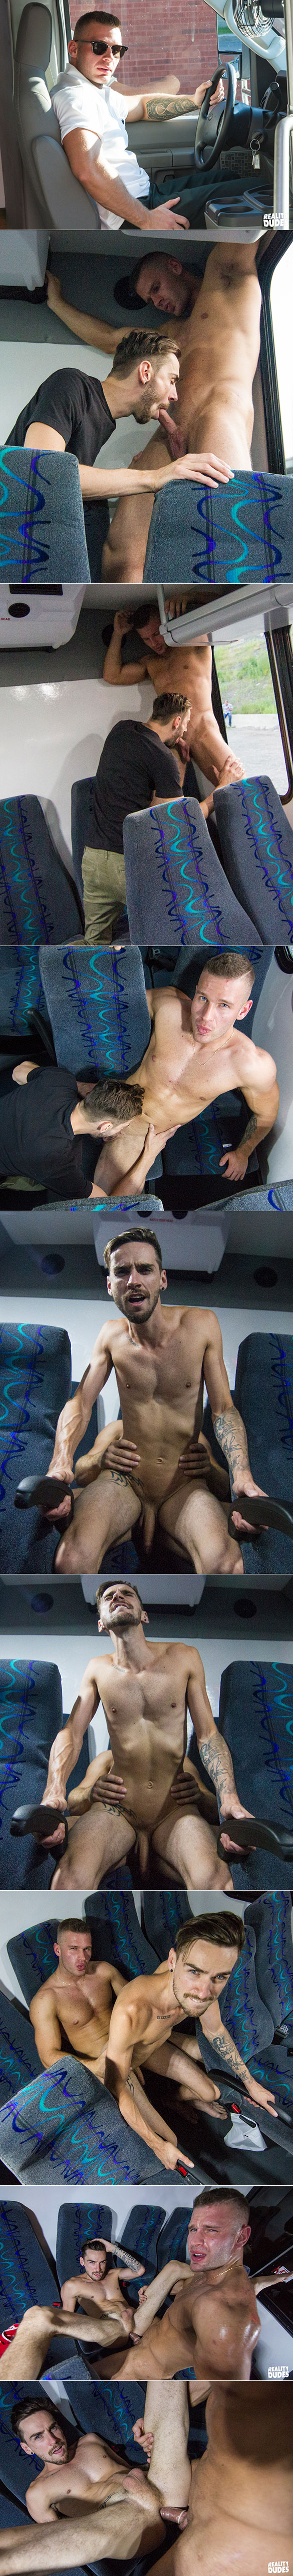 Reality Dudes: Charles Knight bangs Lucas James in "Dudes In Public 28 – Bus Fuck"